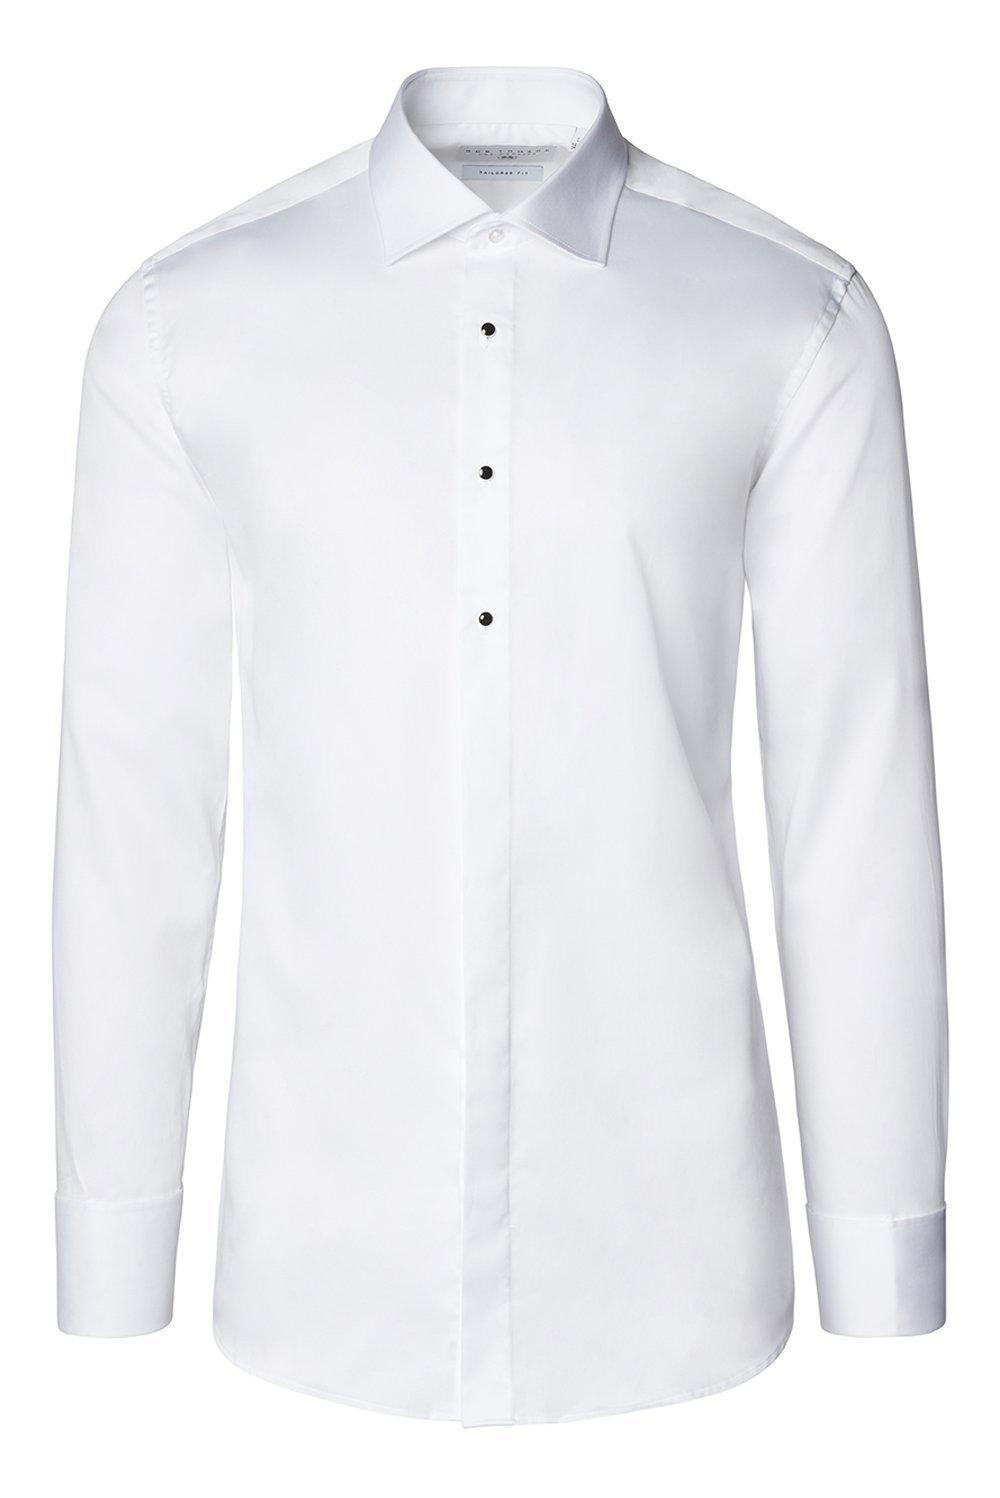 Classical Top 3 Front Stud Tuxedo Shirt - White - Ron Tomson